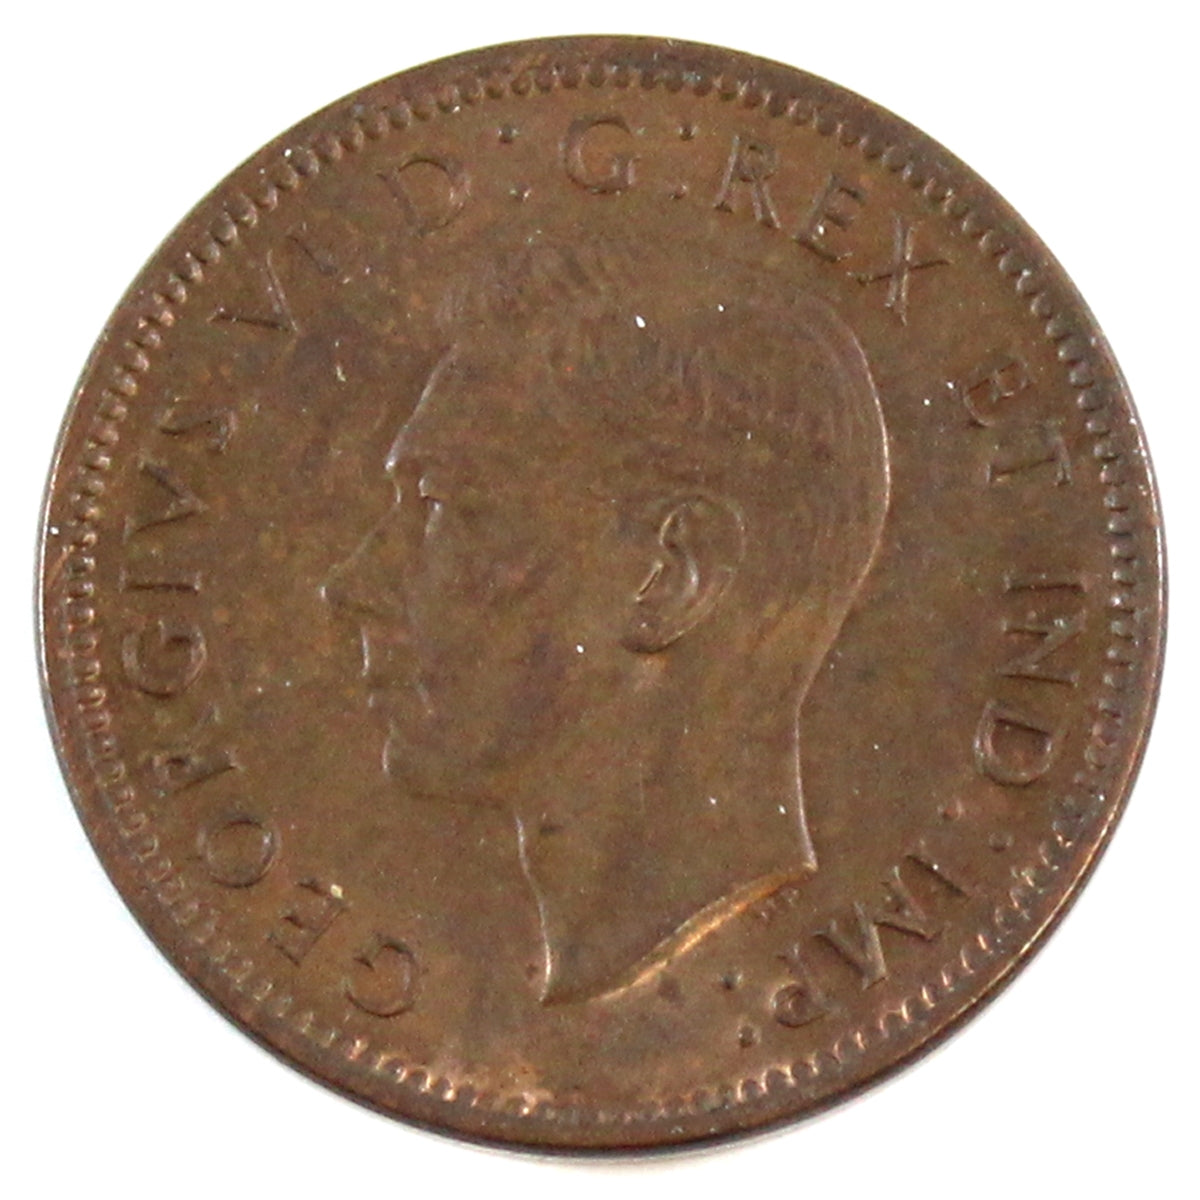 1941 Canada 1-cent Almost Uncirculated (AU-50)